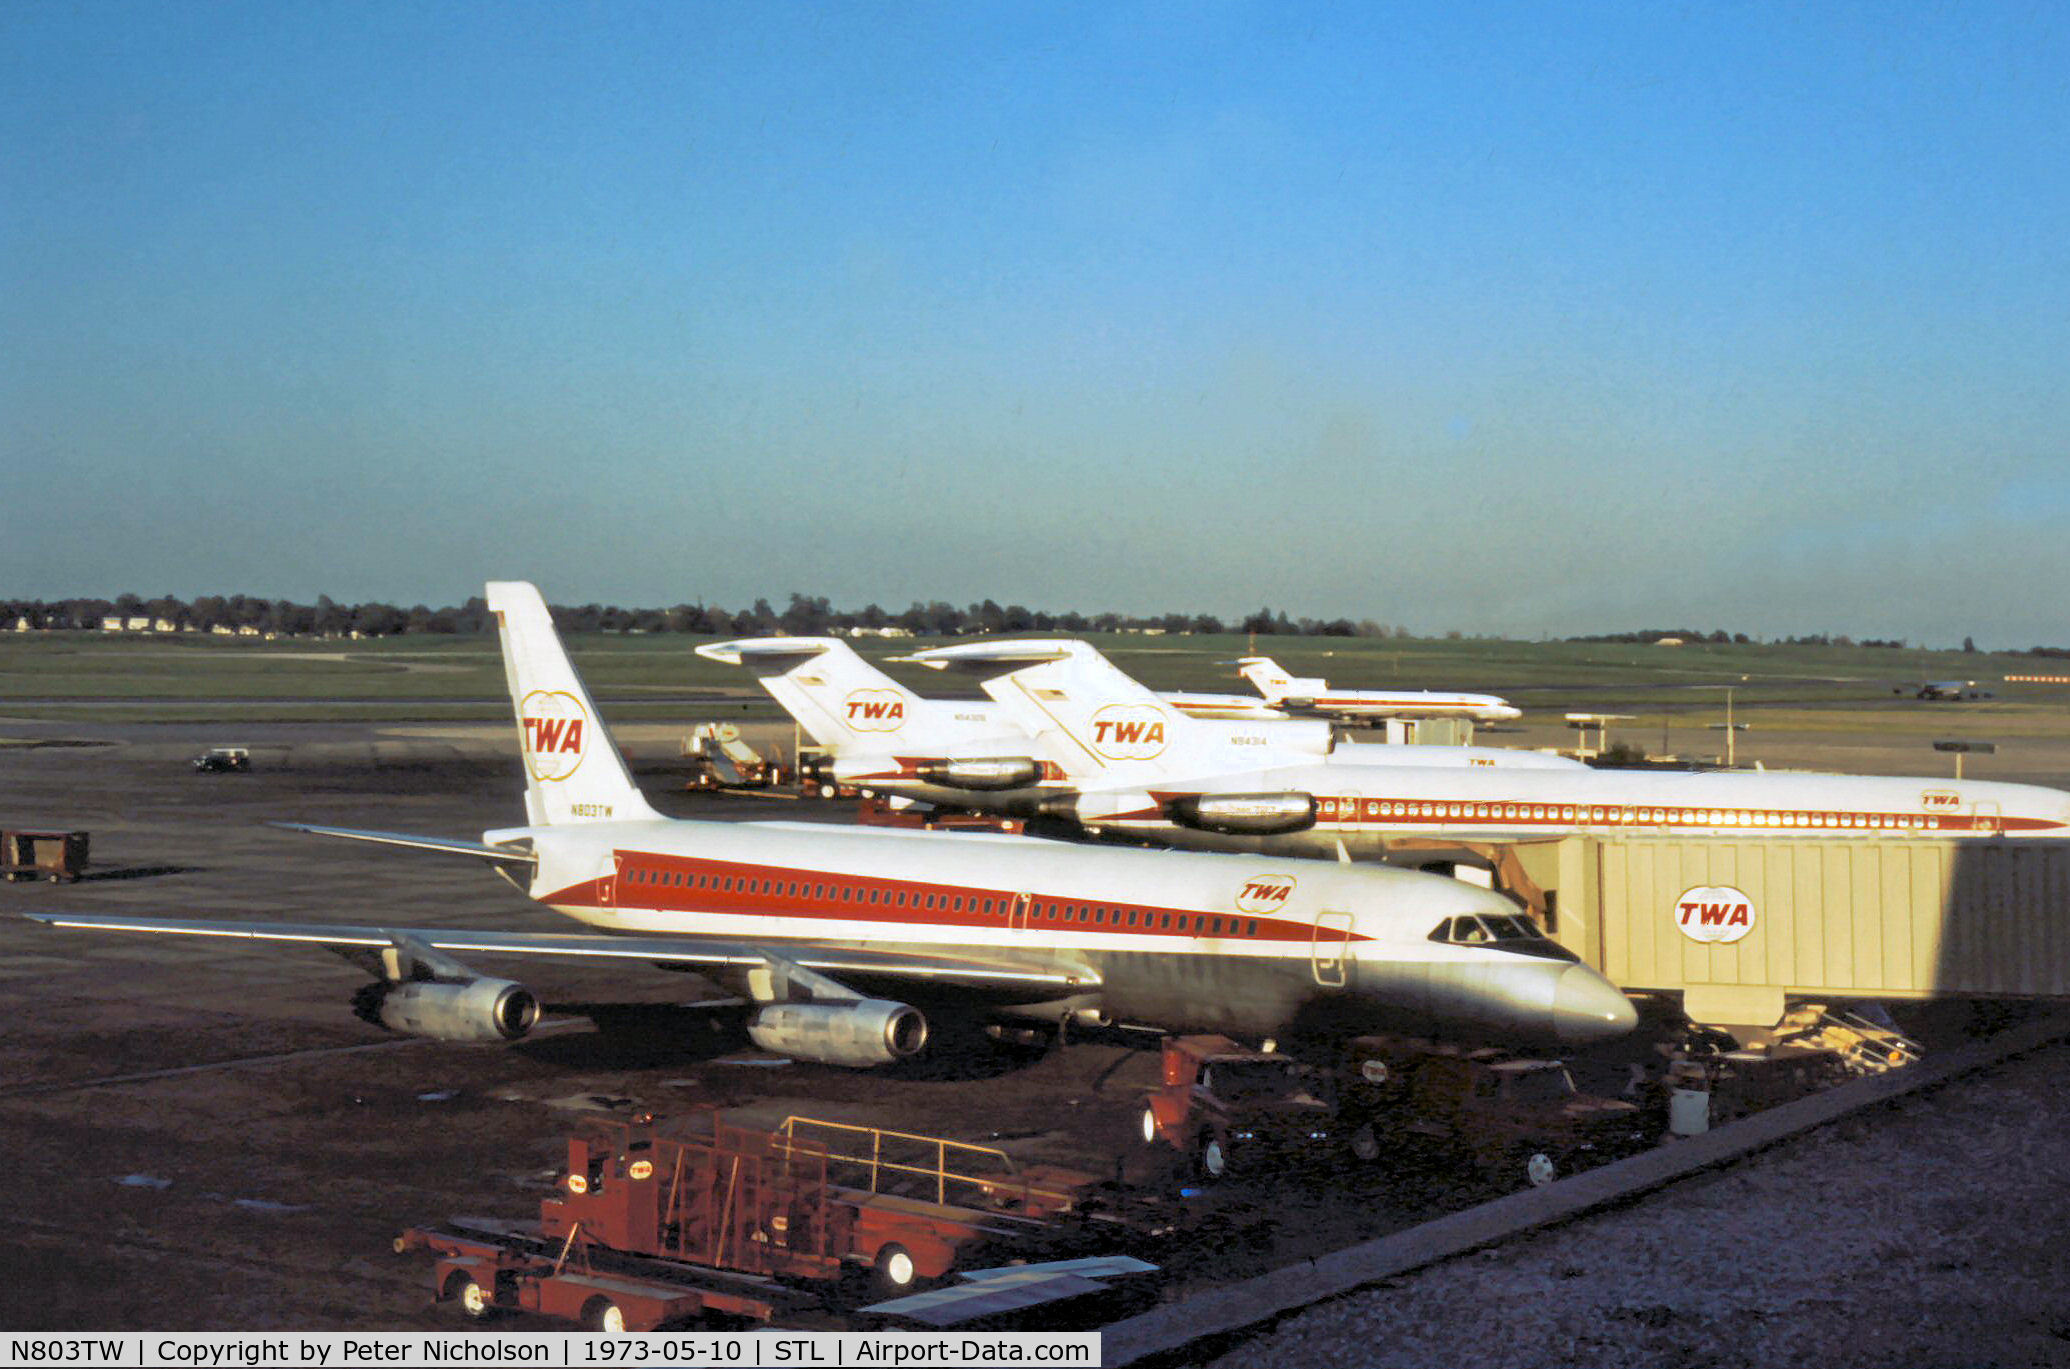 N803TW, 1961 Convair 880-22-1 C/N 22-00-3, Convair 880-22 of Trans-World Airlines at the terminal at St. Louis in May 1973.